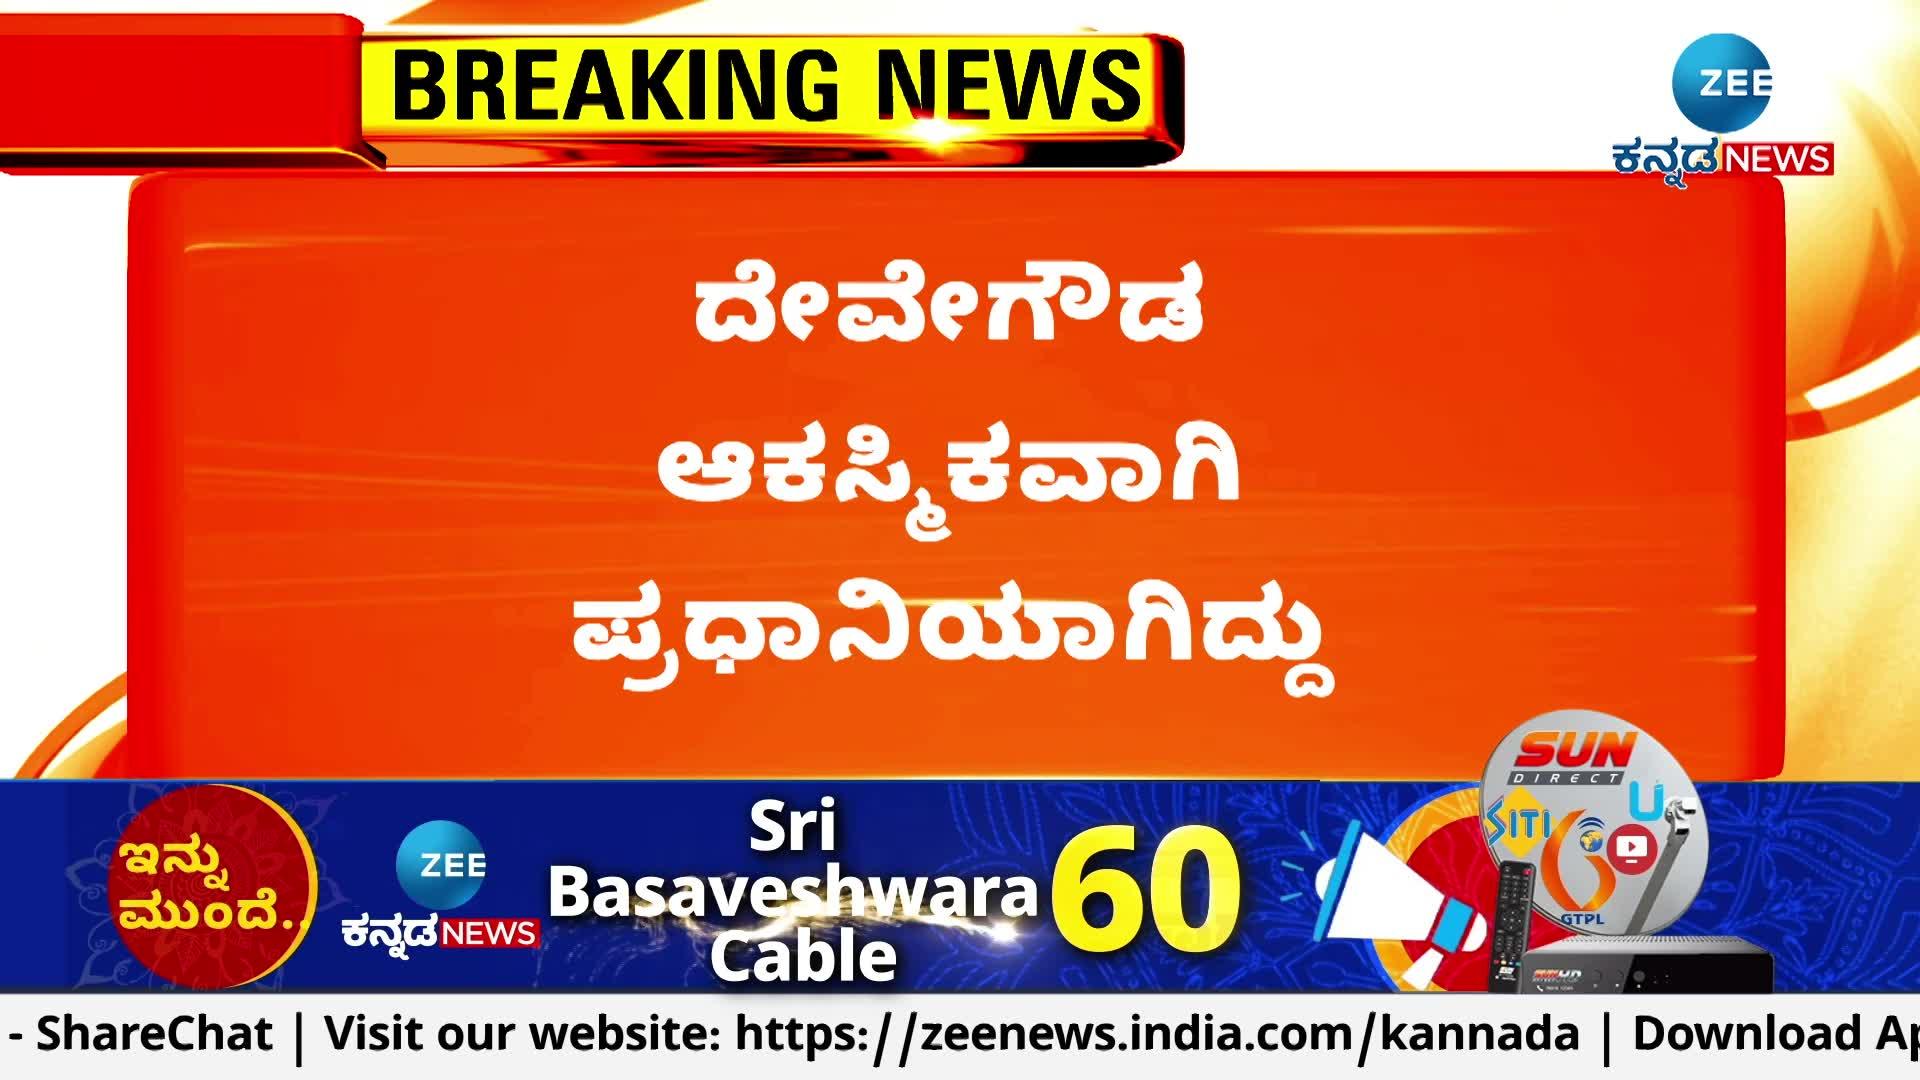 CM Siddaramaiah said HD Deve Gowda became Prime Minister by accident